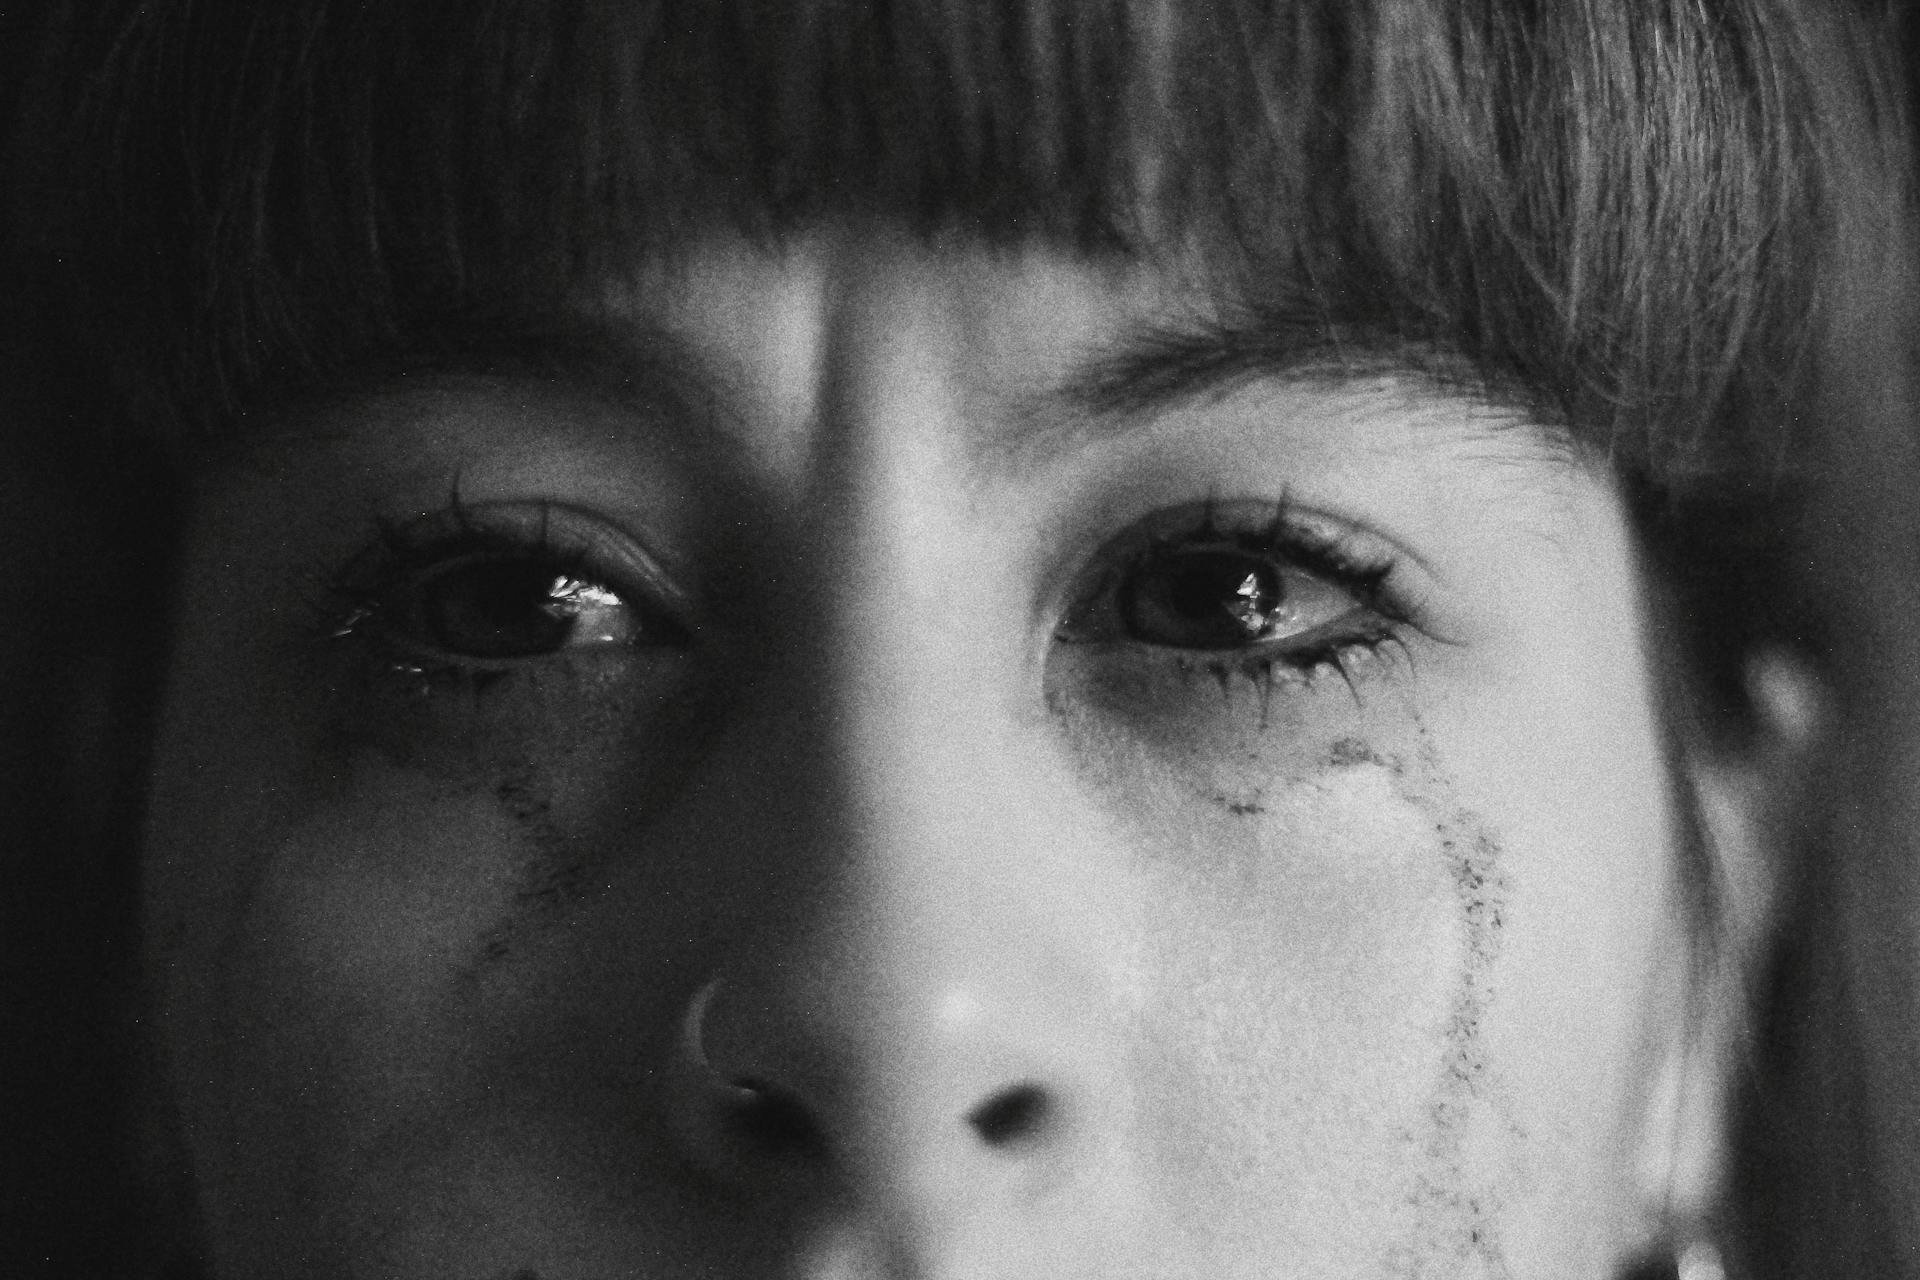 A woman crying | Source: Pexels